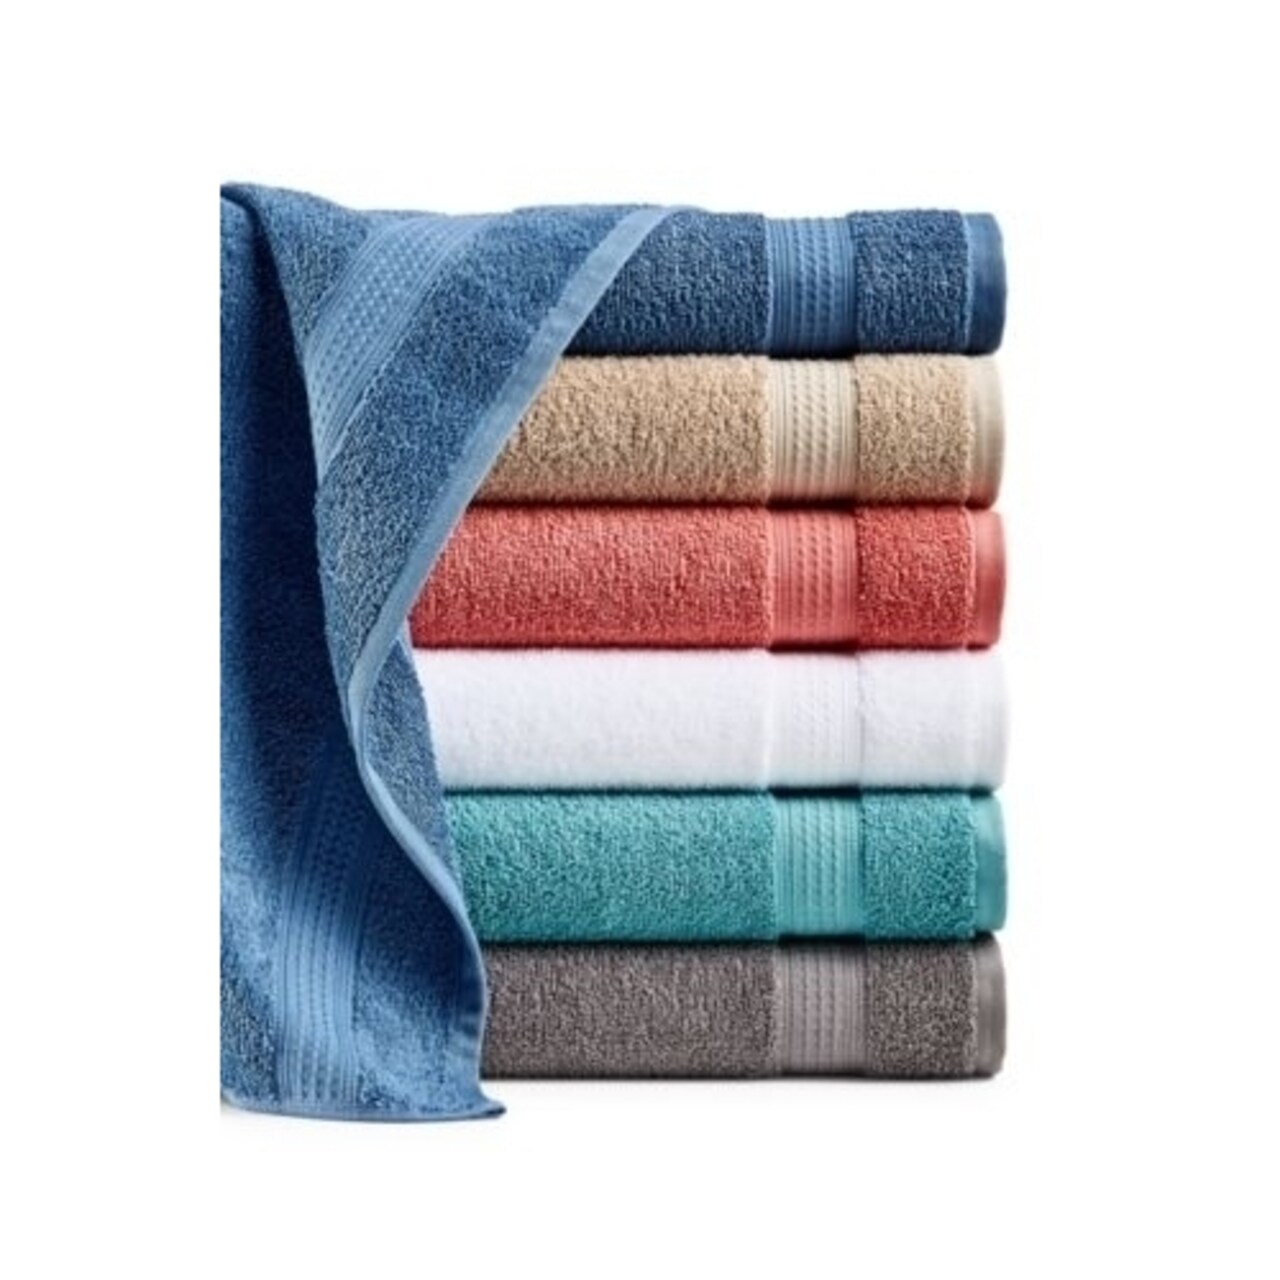 3-Pack Mystery Deal: Ultra-Soft Bathroom Towels - 54 x 27 100% Cotton Large  Bath Towels